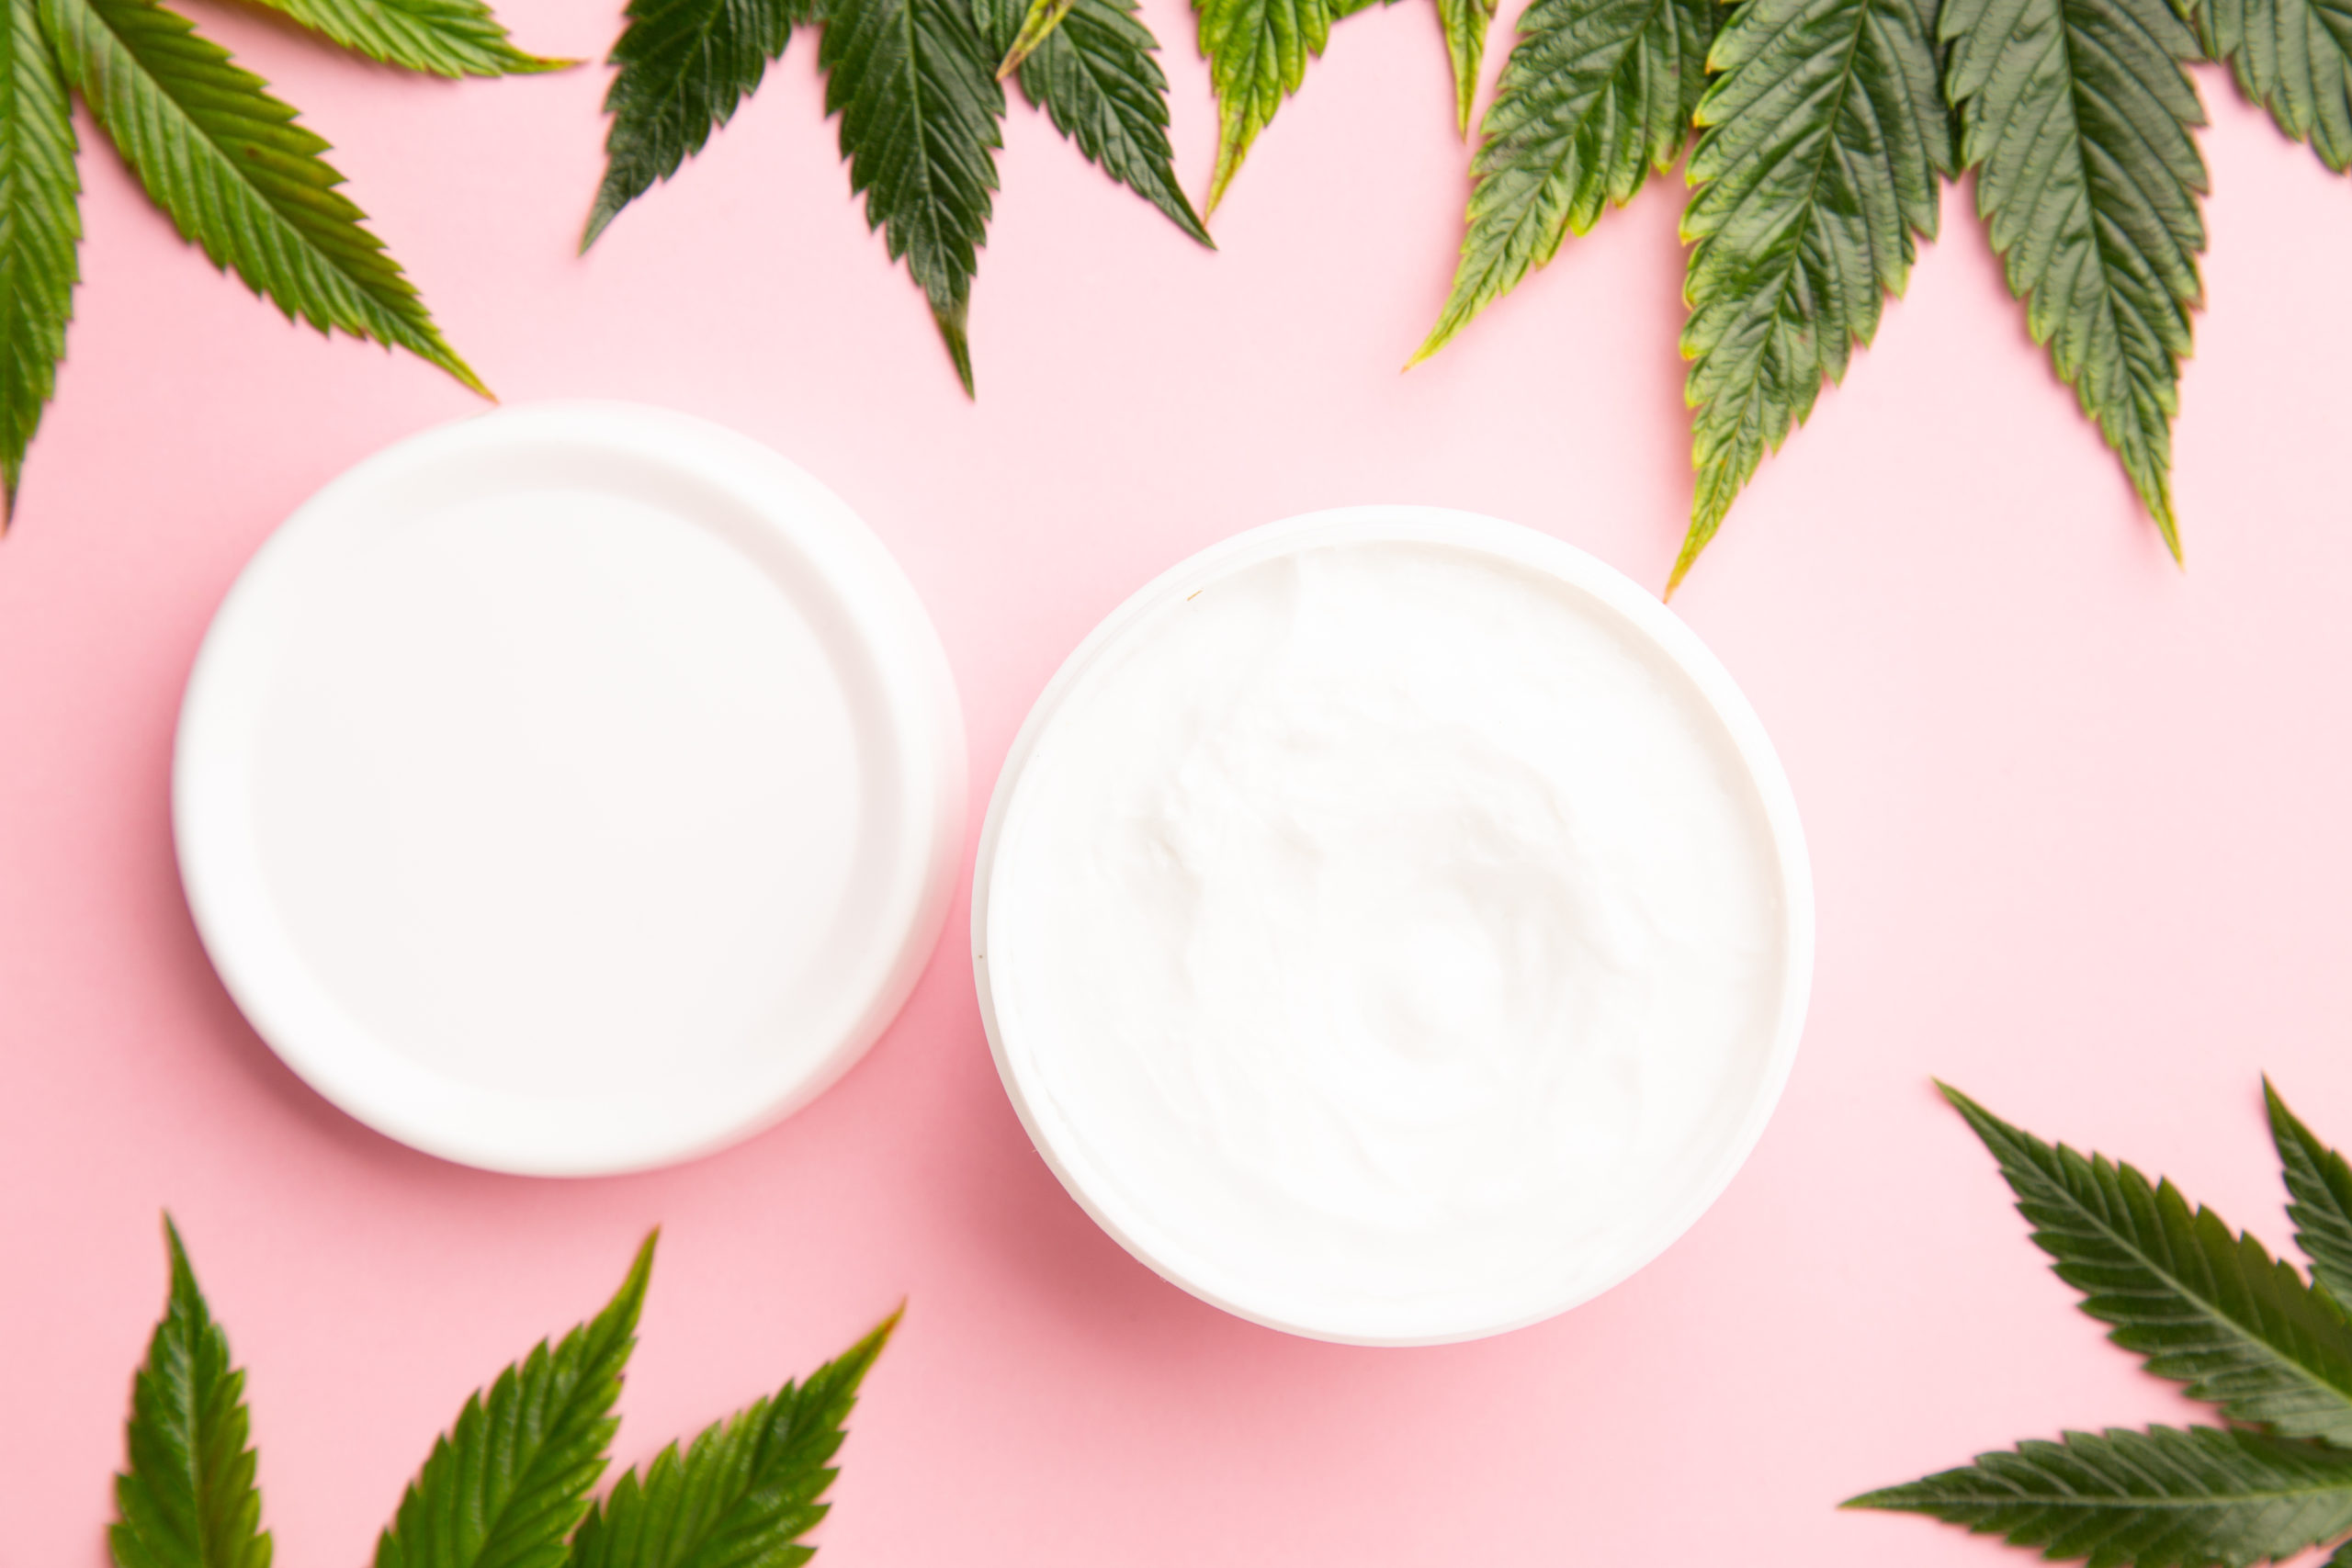 CBD lotion for pain